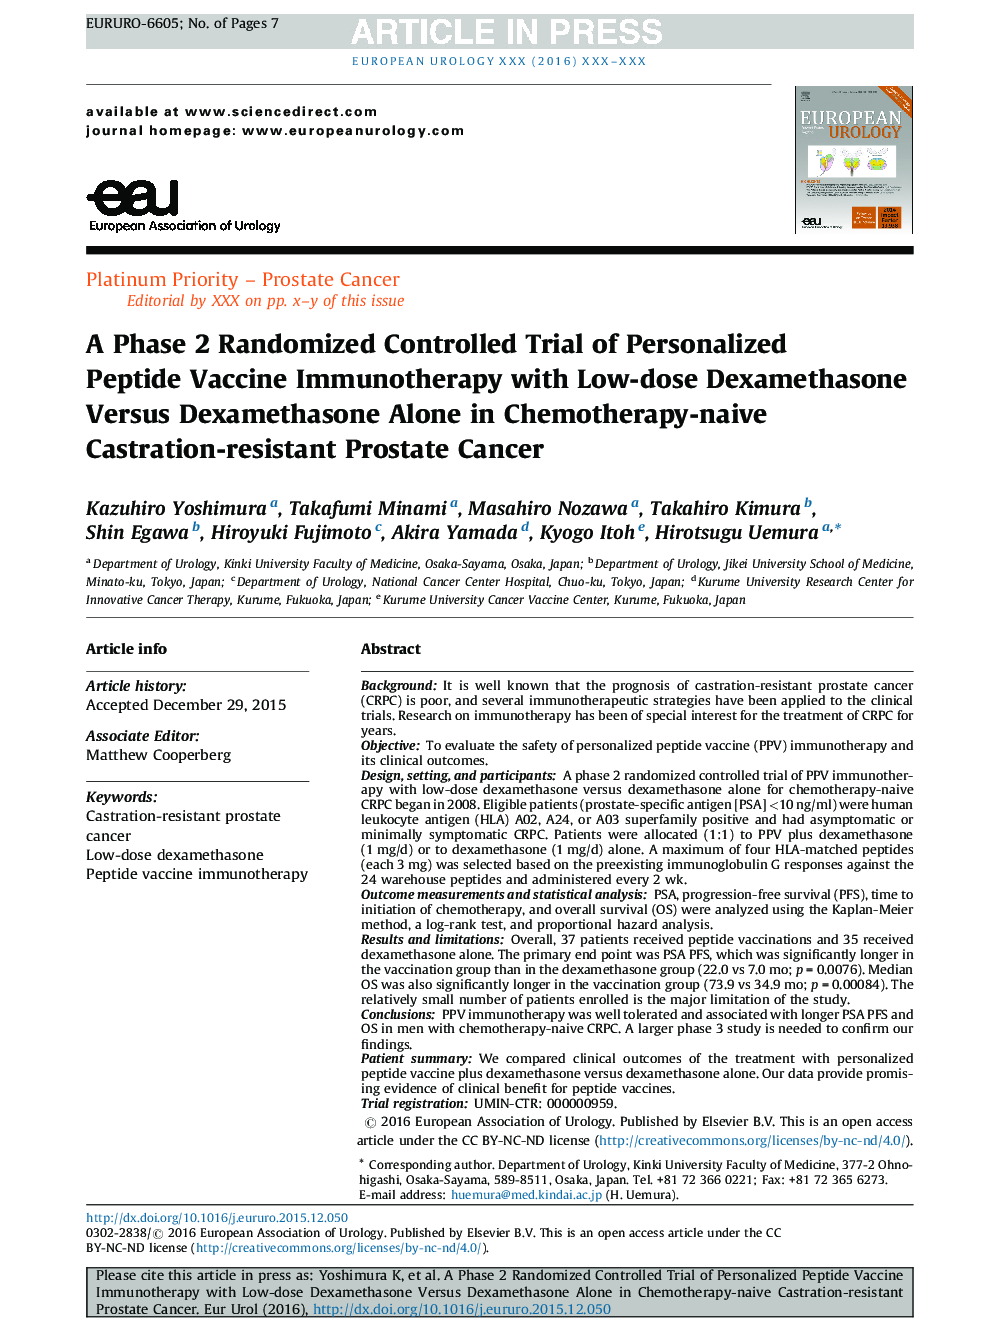 A Phase 2 Randomized Controlled Trial of Personalized Peptide Vaccine Immunotherapy with Low-dose Dexamethasone Versus Dexamethasone Alone in Chemotherapy-naive Castration-resistant Prostate Cancer